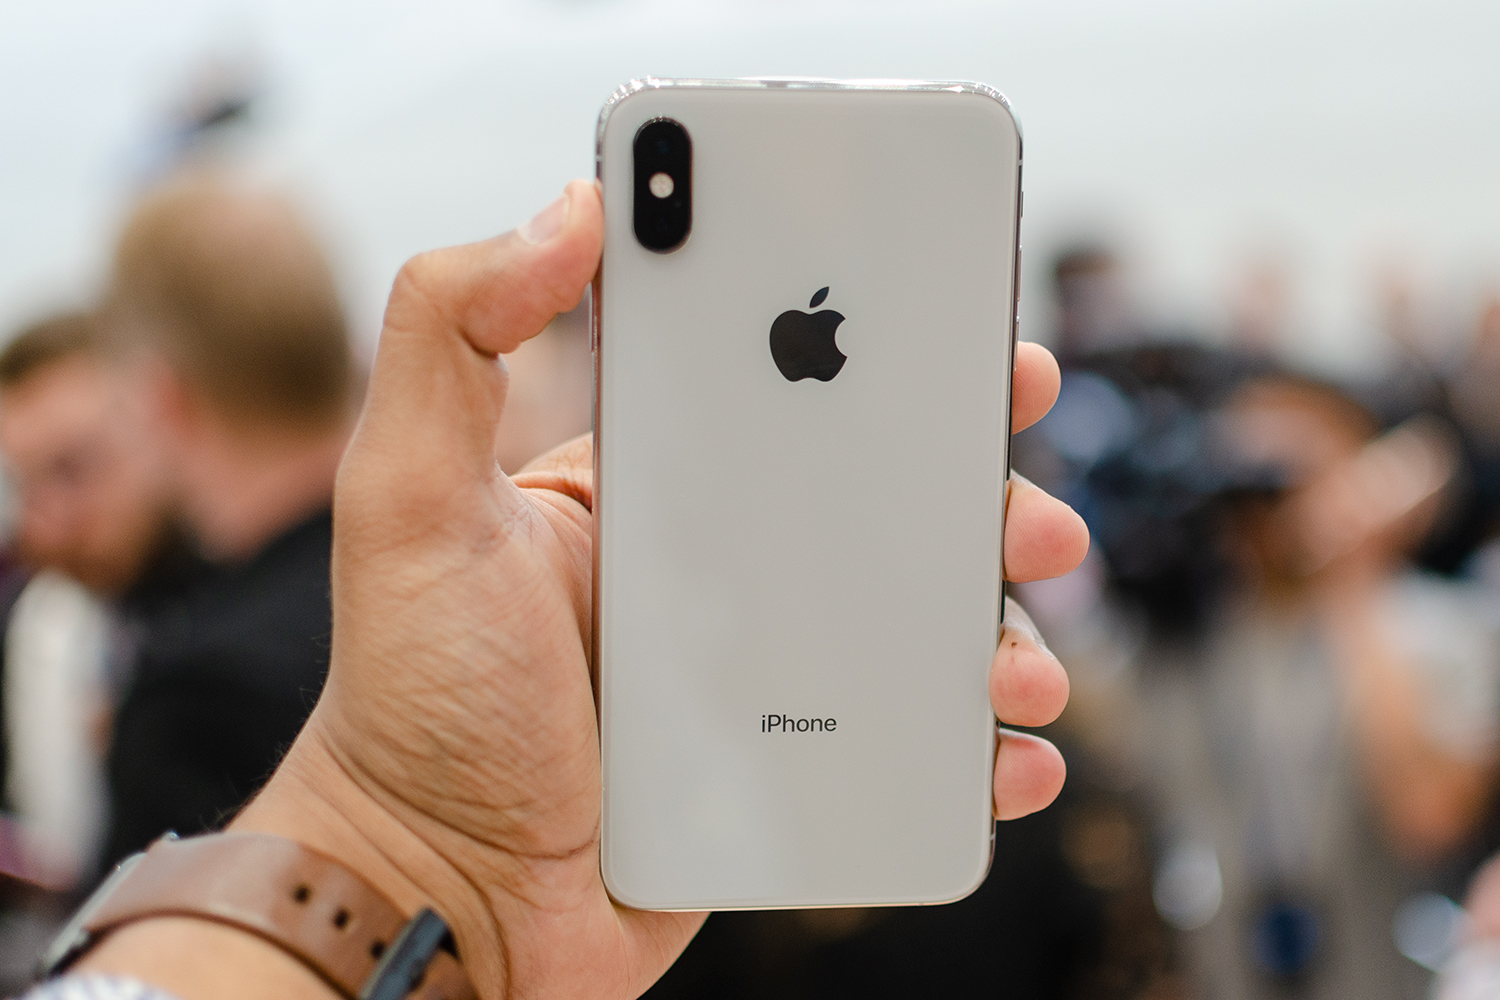 Hands-on: iPhone Xs, Xs Max, and Xr